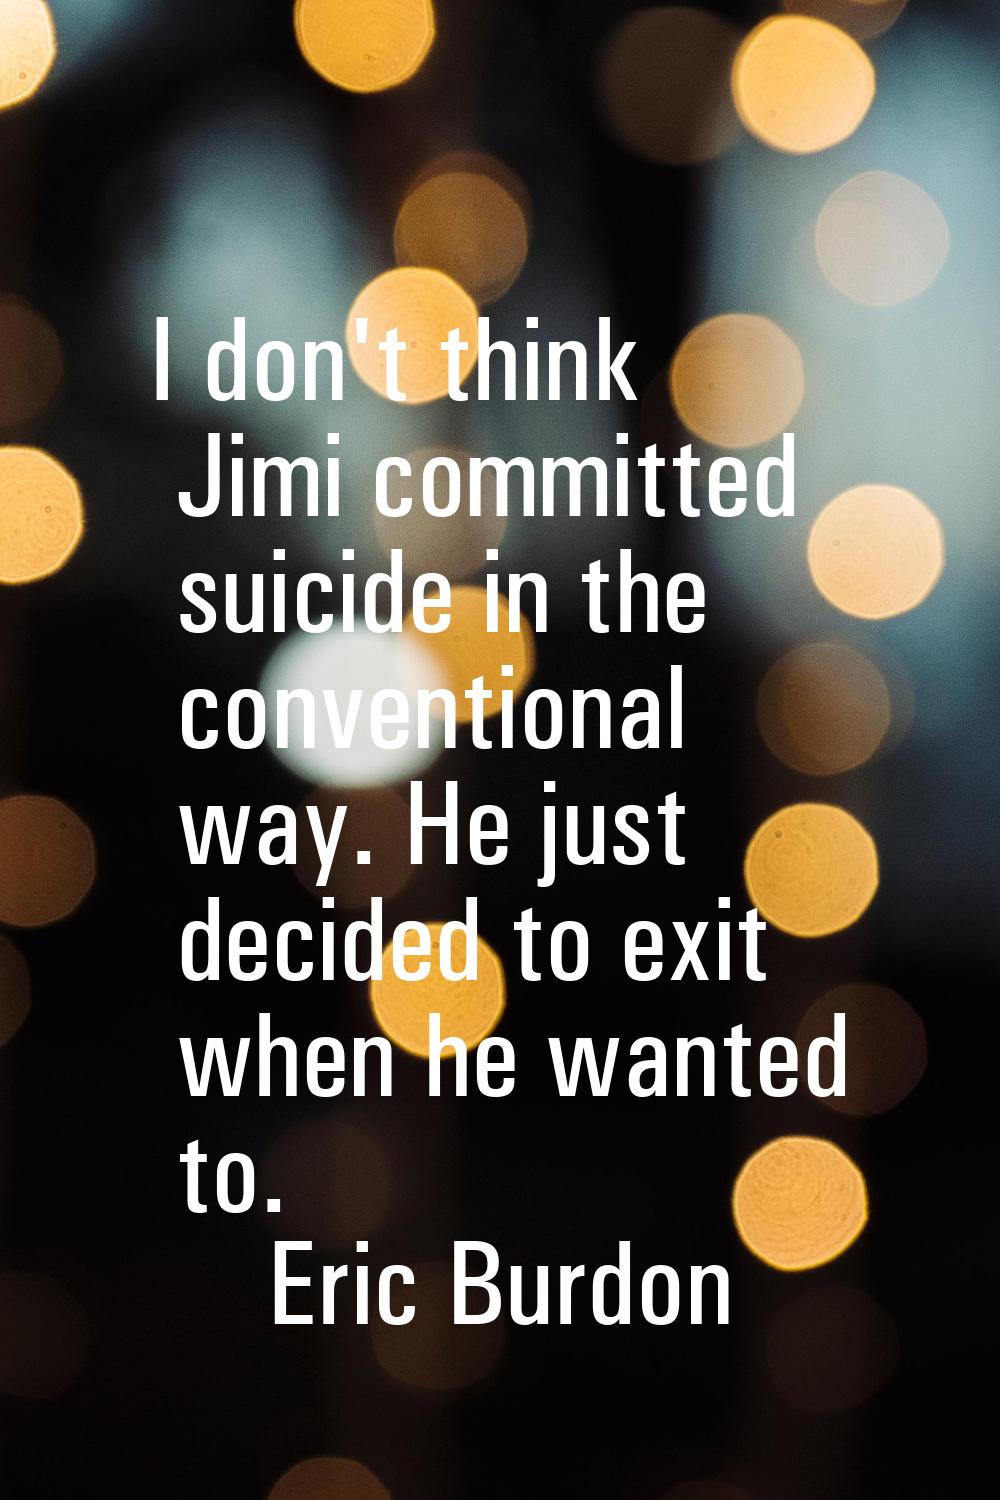 I don't think Jimi committed suicide in the conventional way. He just decided to exit when he wante